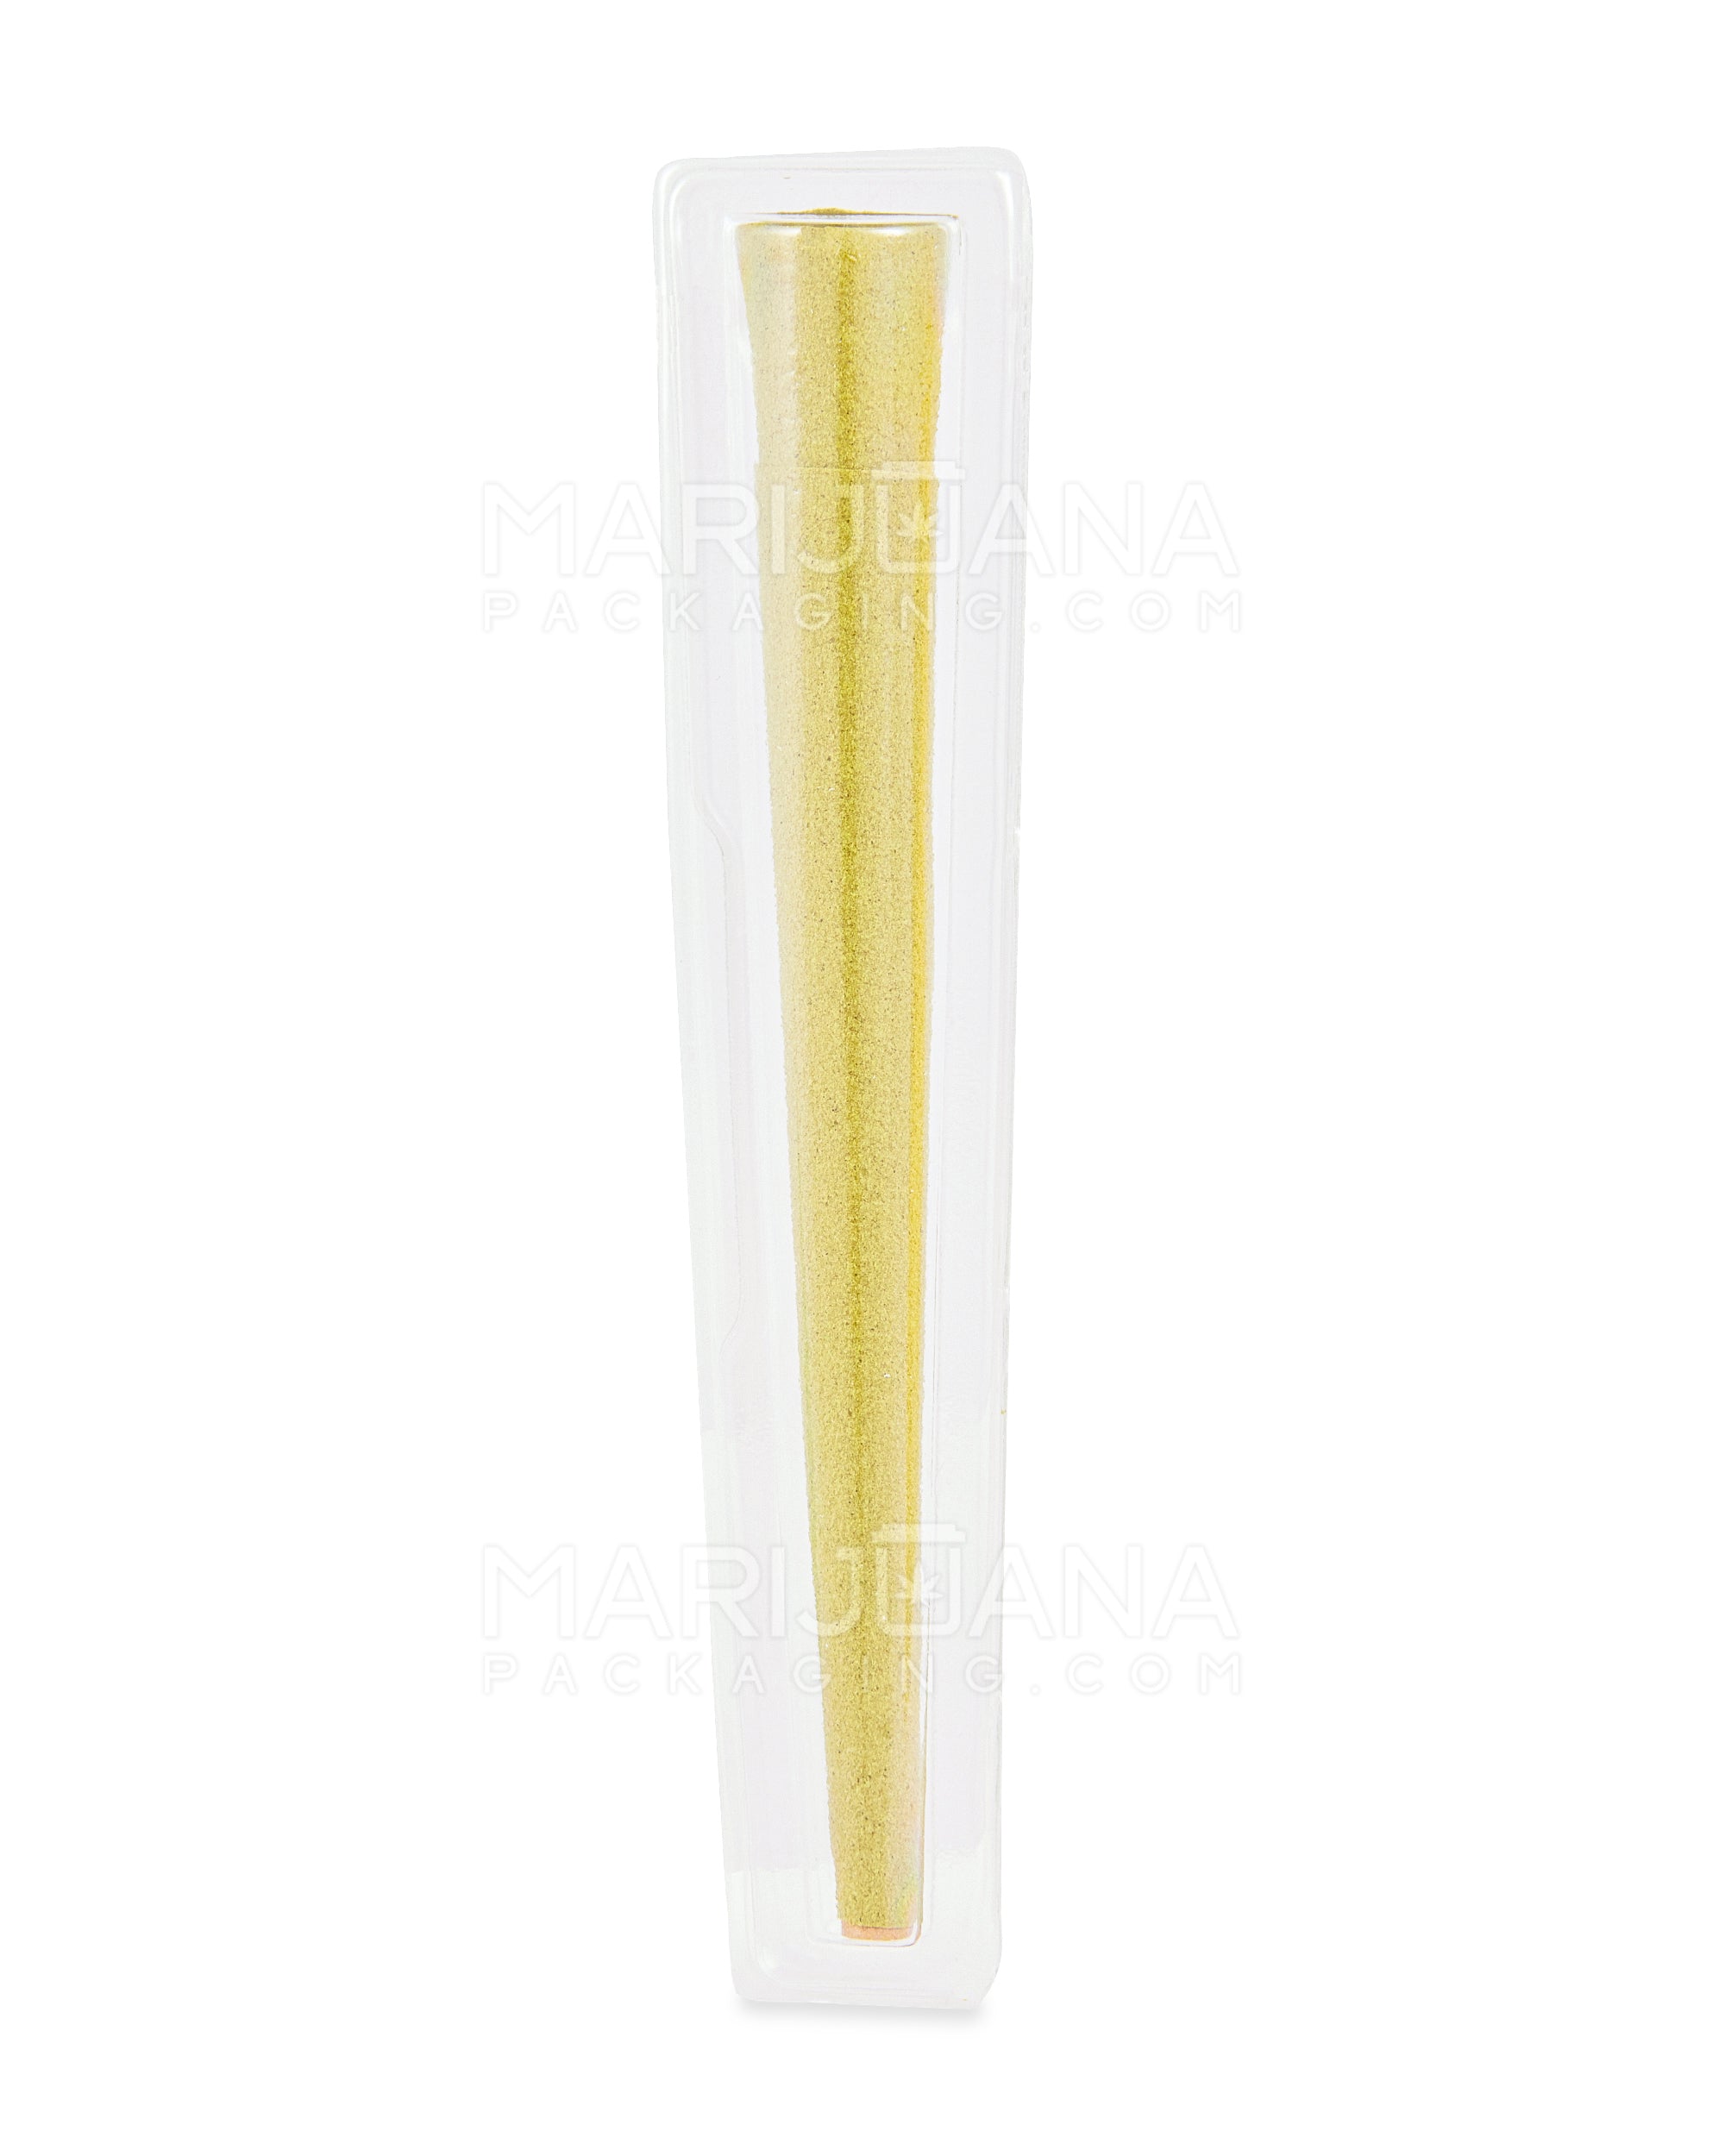 KUSH | 'Retail Display' Pre Rolled Herbal Conical Wraps | 157mm - Zero - 15 Count - 5